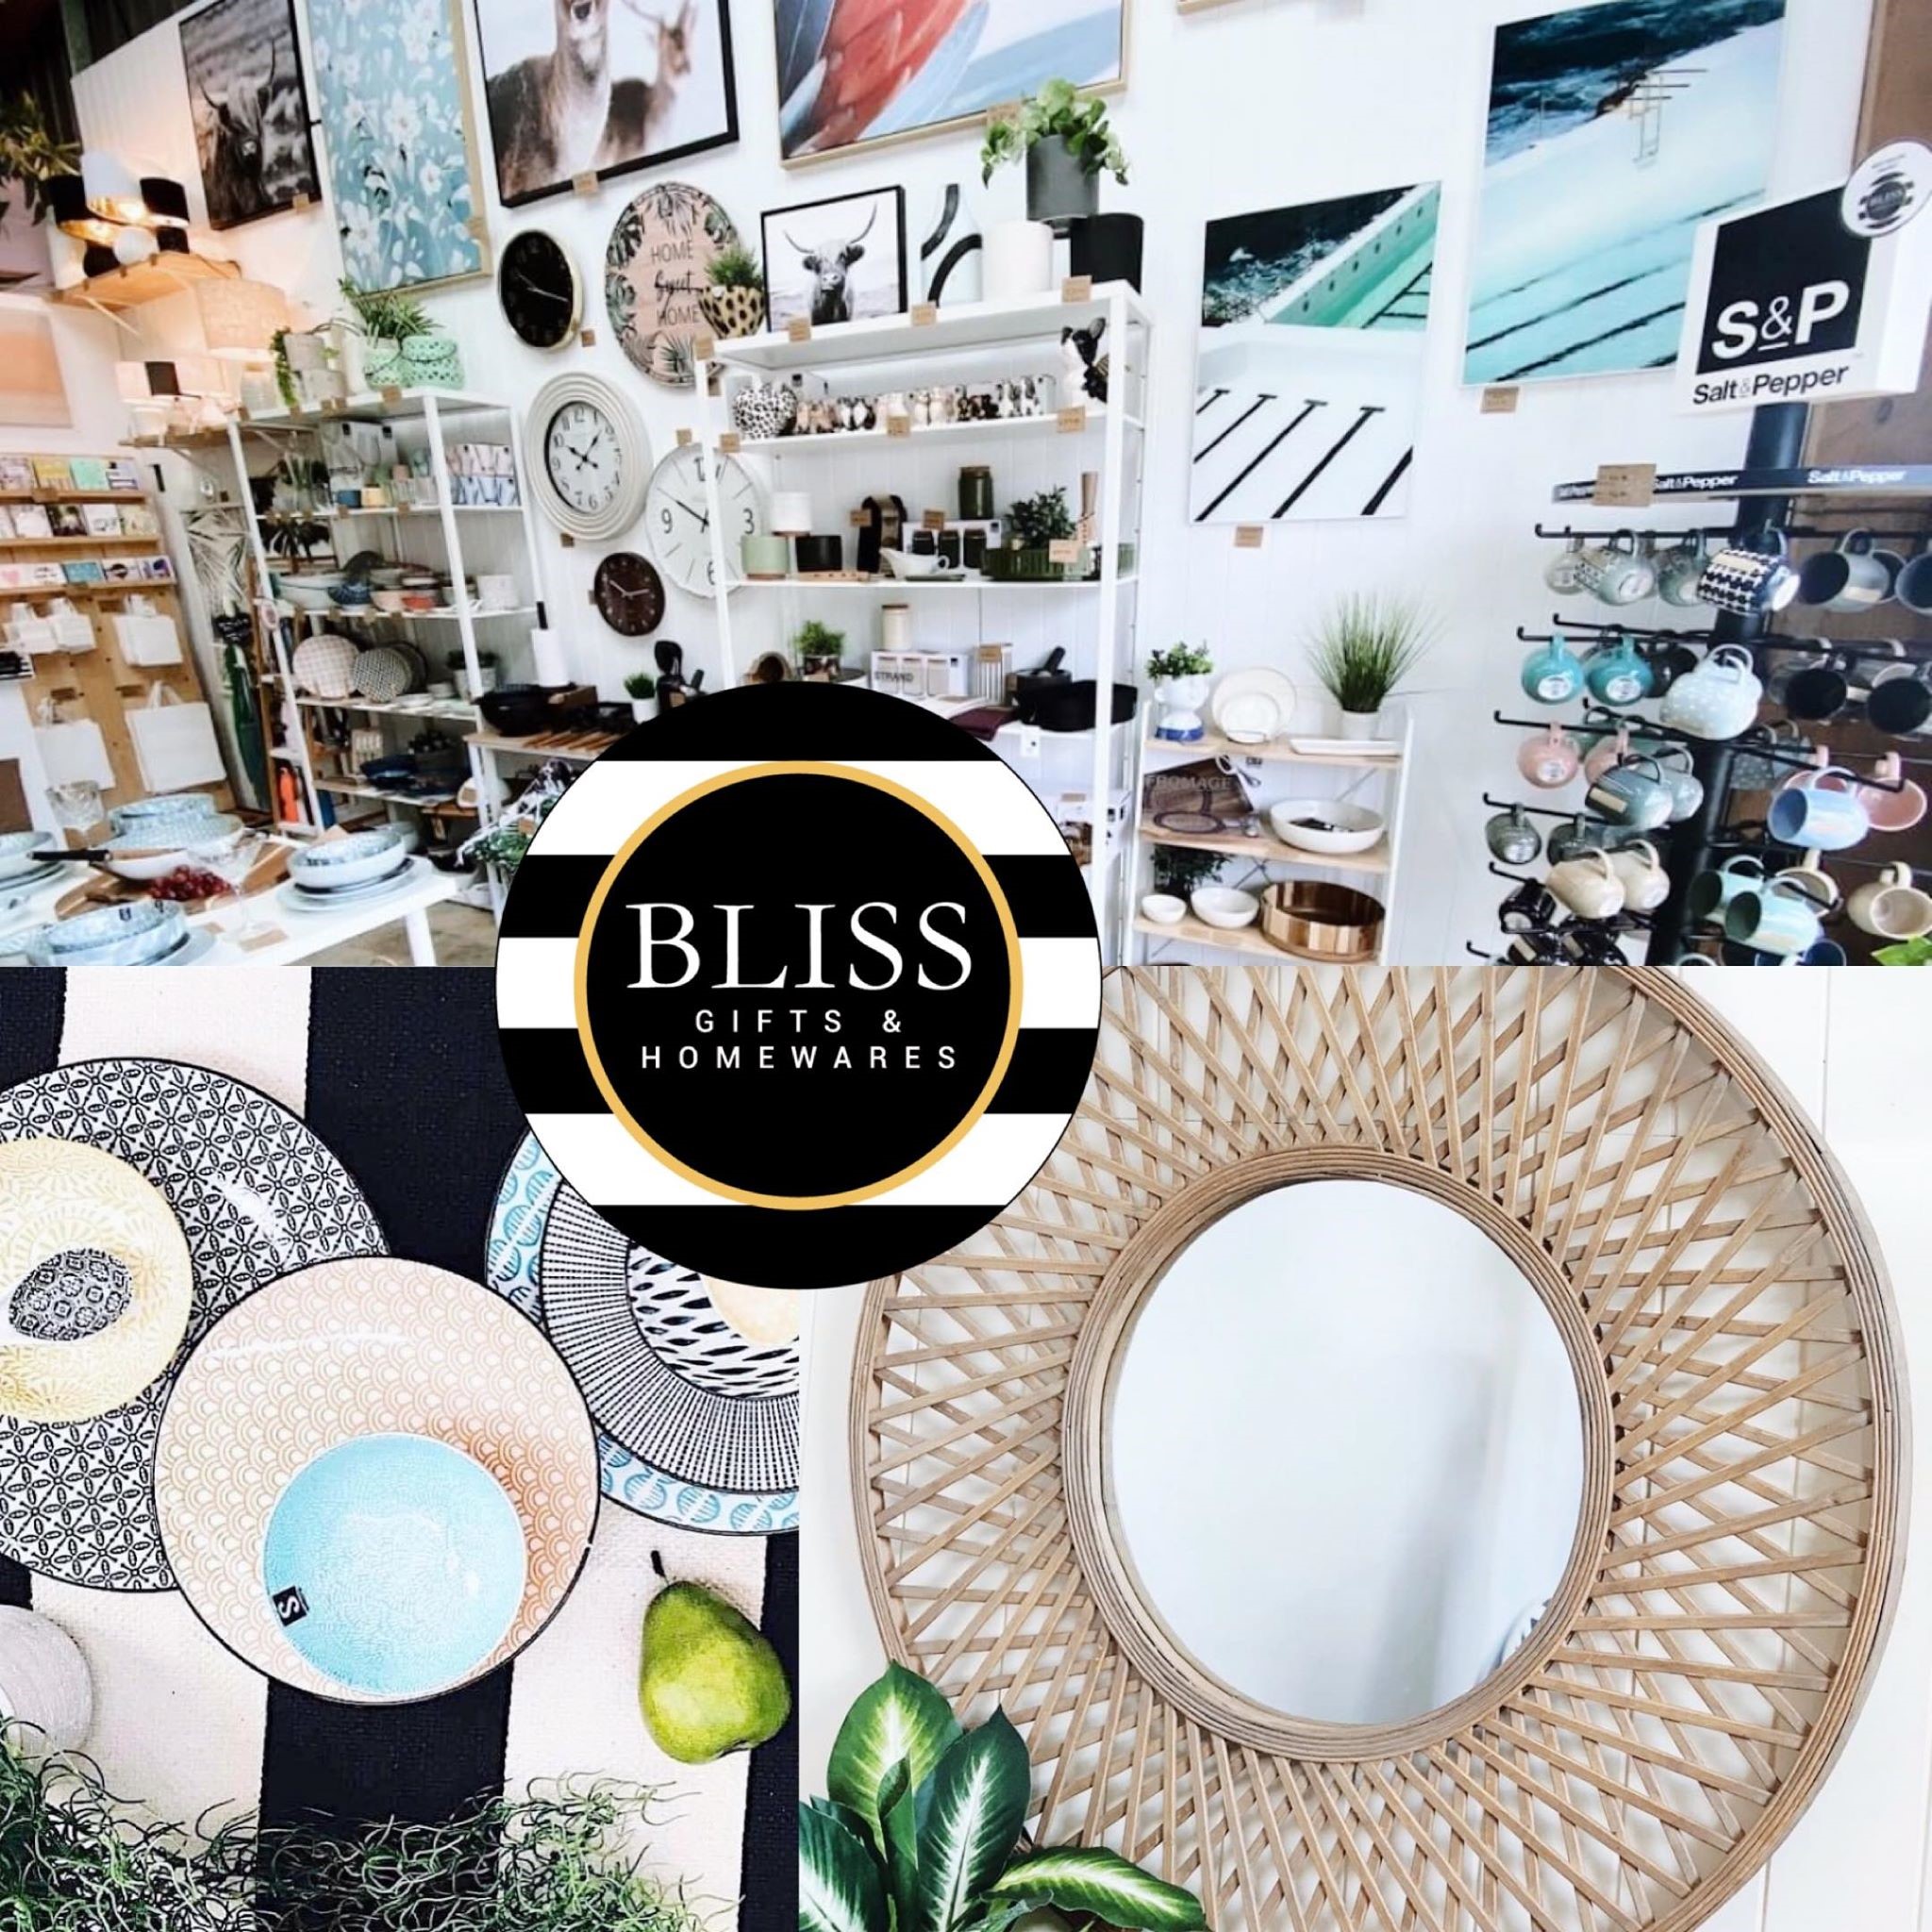 BLISS Gifts & Homewares